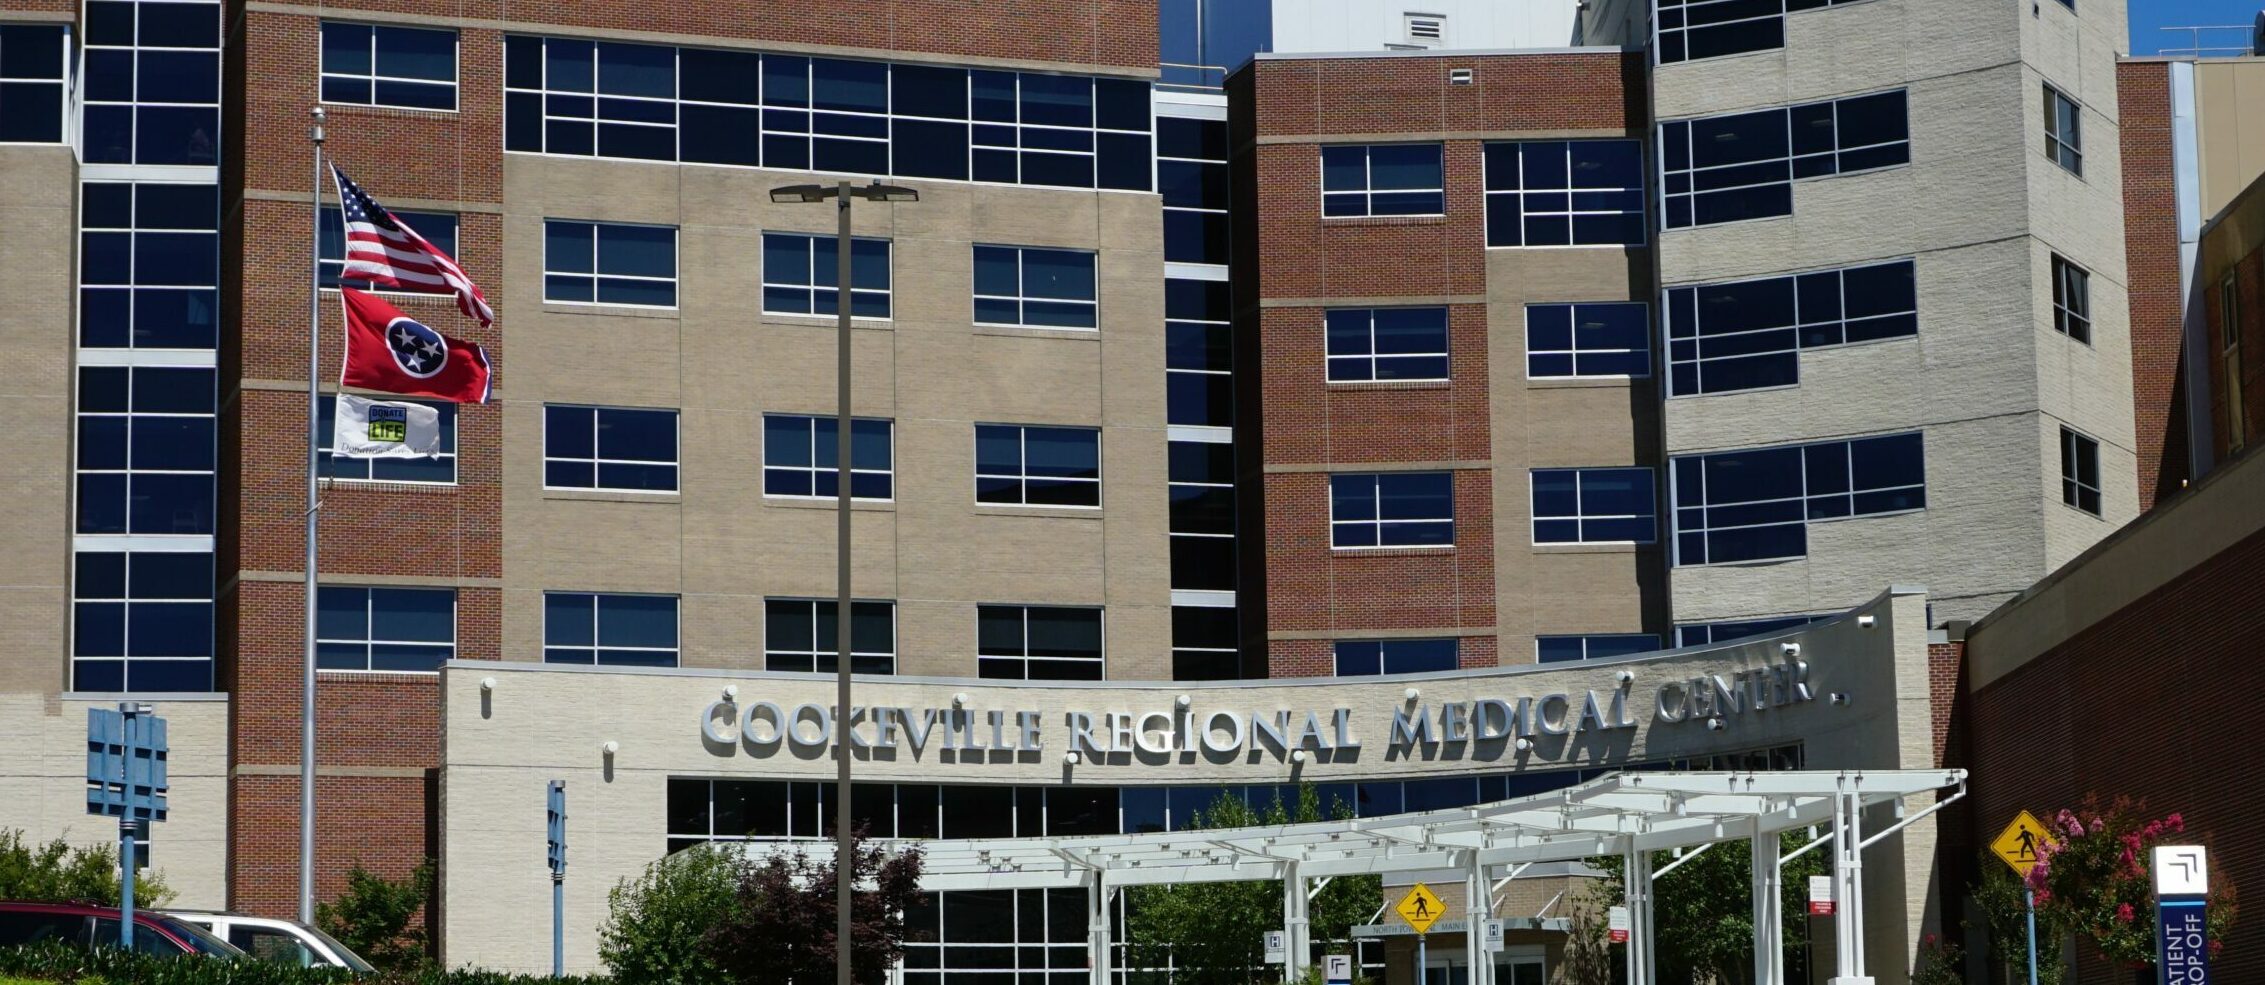 The front image of Cookeville Regional Medical Center